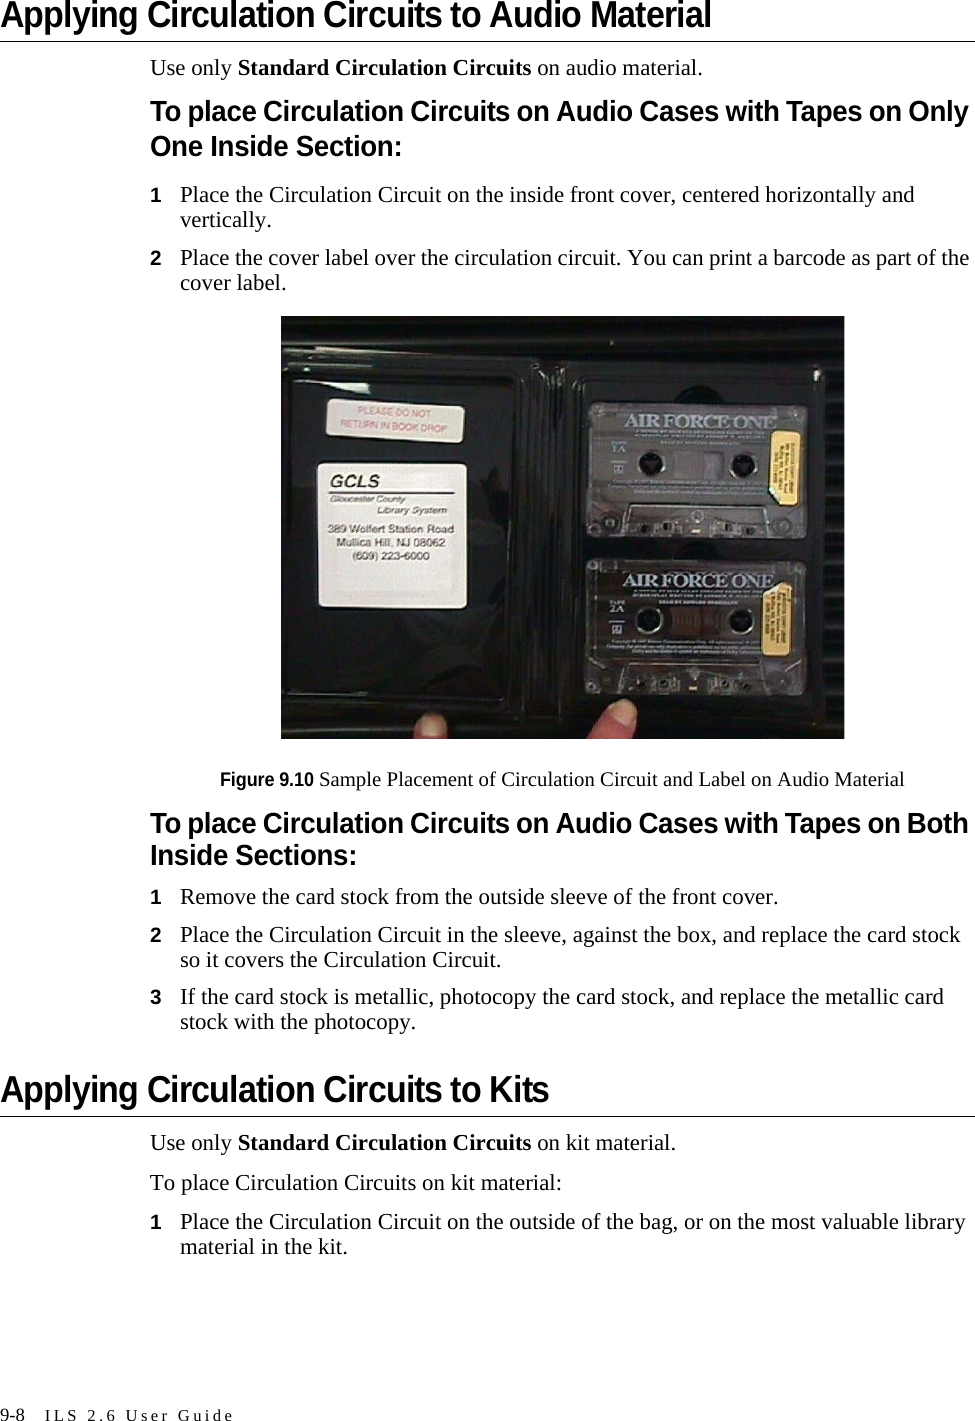 9-8 ILS 2.6 User GuideApplying Circulation Circuits to Audio MaterialUse only Standard Circulation Circuits on audio material.To place Circulation Circuits on Audio Cases with Tapes on Only One Inside Section:1Place the Circulation Circuit on the inside front cover, centered horizontally and vertically.2Place the cover label over the circulation circuit. You can print a barcode as part of the cover label.Figure 9.10 Sample Placement of Circulation Circuit and Label on Audio MaterialTo place Circulation Circuits on Audio Cases with Tapes on Both Inside Sections:1Remove the card stock from the outside sleeve of the front cover.2Place the Circulation Circuit in the sleeve, against the box, and replace the card stock so it covers the Circulation Circuit.3If the card stock is metallic, photocopy the card stock, and replace the metallic card stock with the photocopy.Applying Circulation Circuits to KitsUse only Standard Circulation Circuits on kit material. To place Circulation Circuits on kit material: 1Place the Circulation Circuit on the outside of the bag, or on the most valuable library material in the kit. 